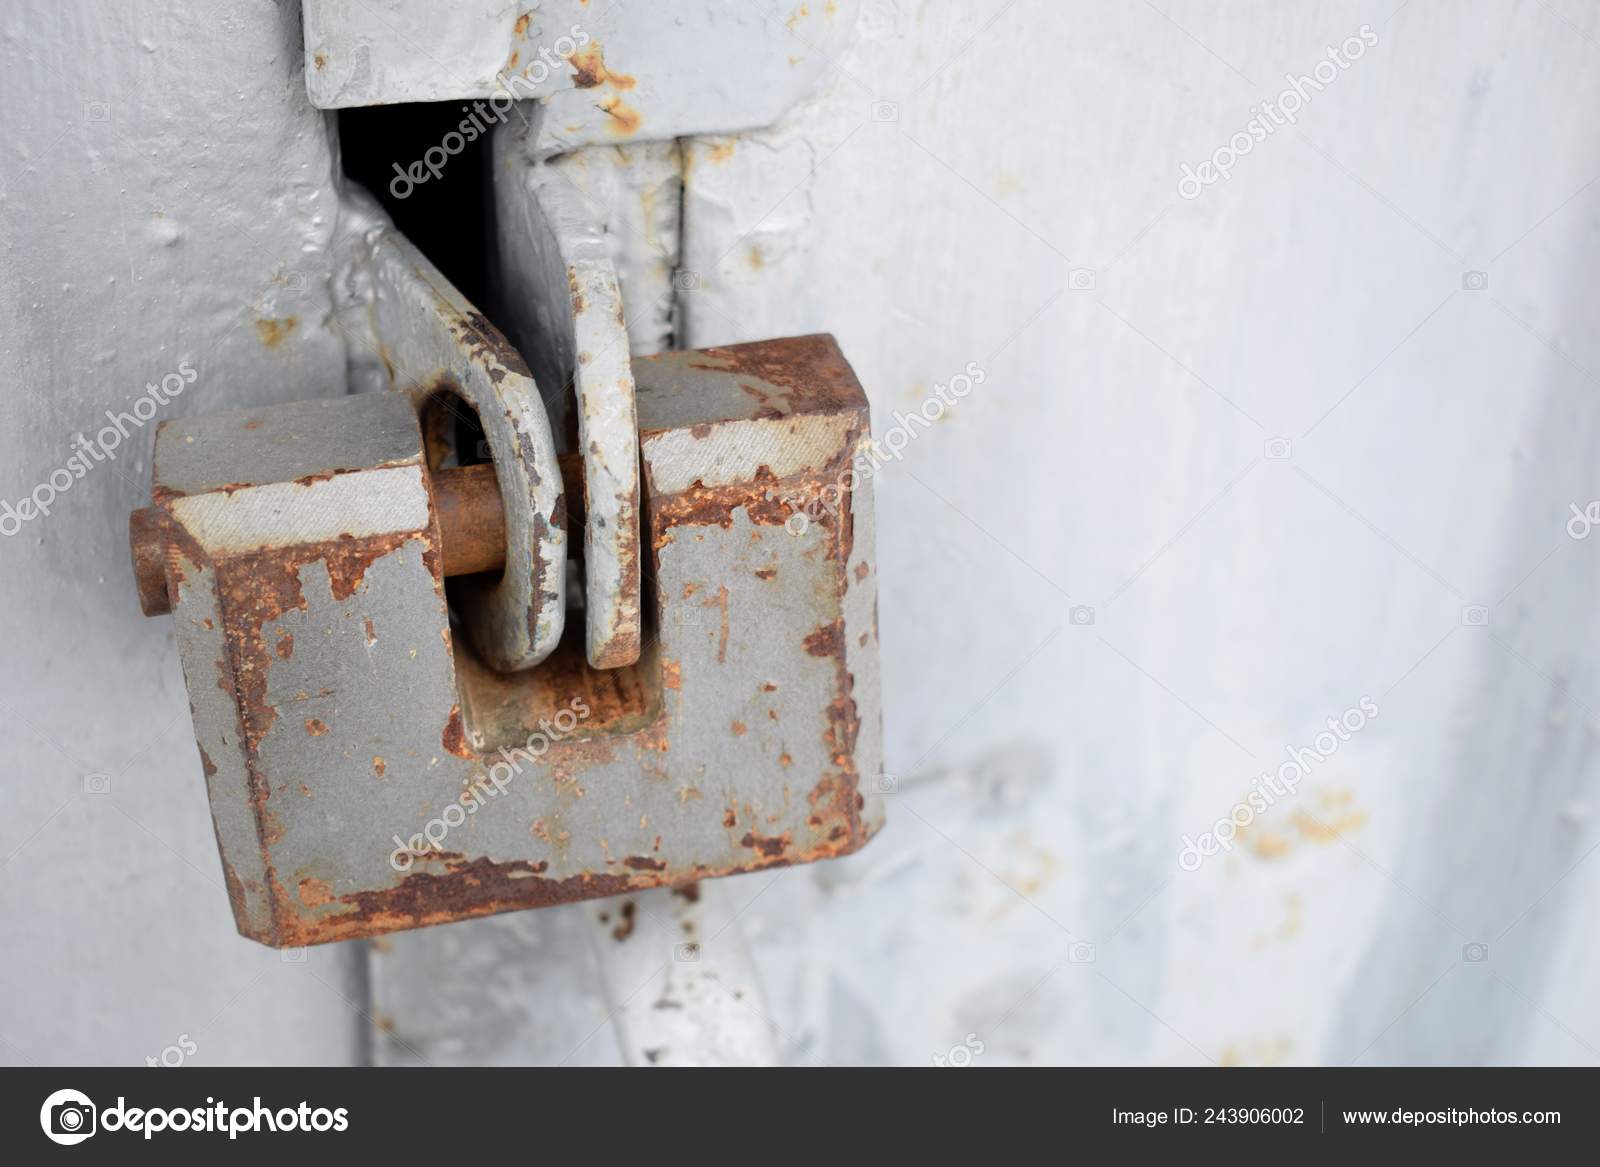 Old Iron Lock Old Garage Door Stock Photo Image By C Denys999 243906002